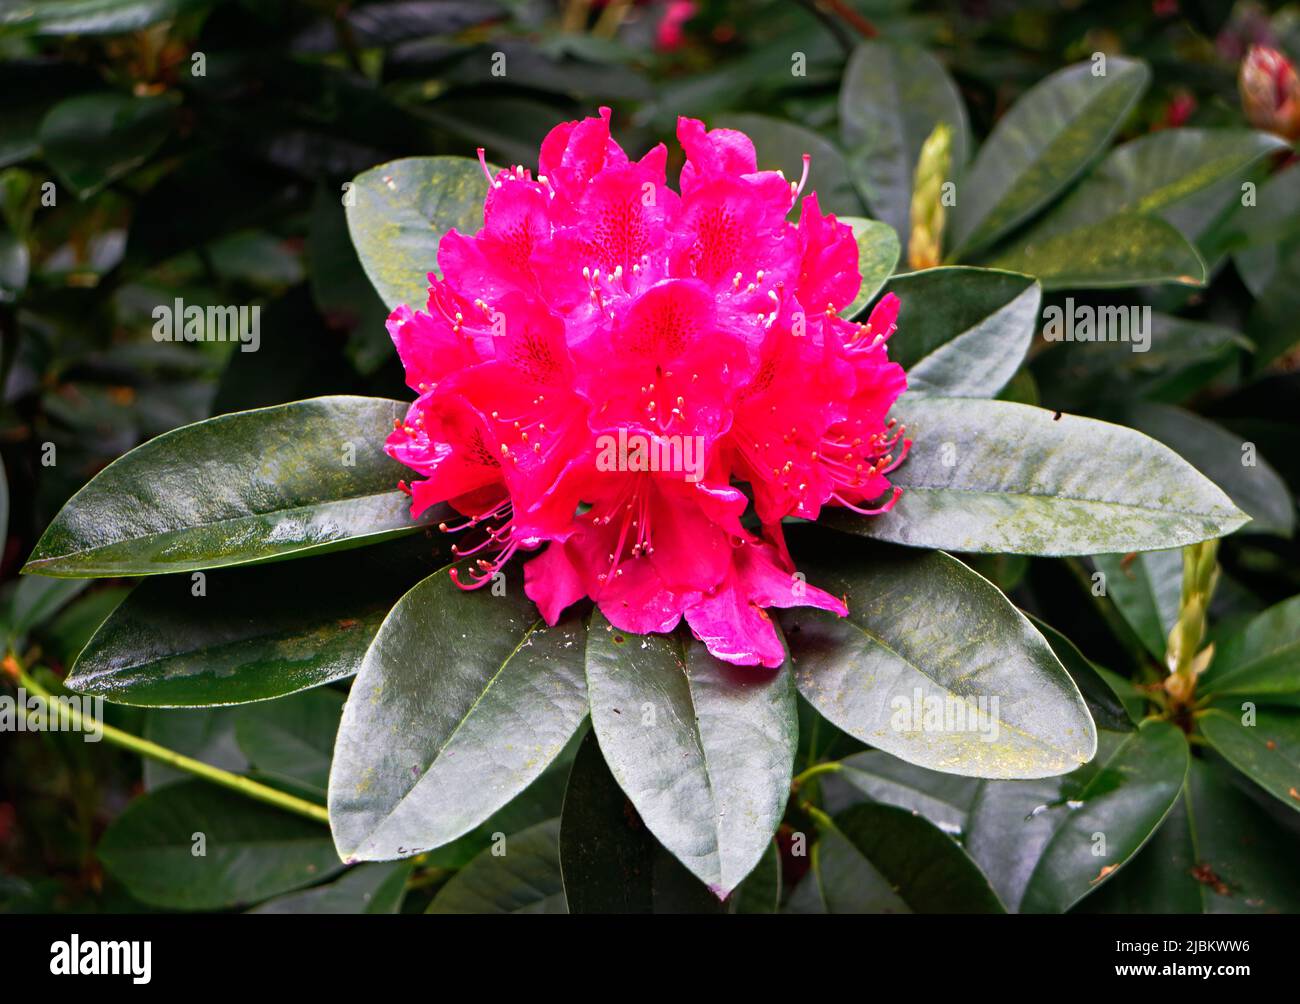 A close-up of the red flowering head of one of the many varities of Rhododendron in Sheringham Park in Upper Sheringham, Norfolk, England, UK. Stock Photo